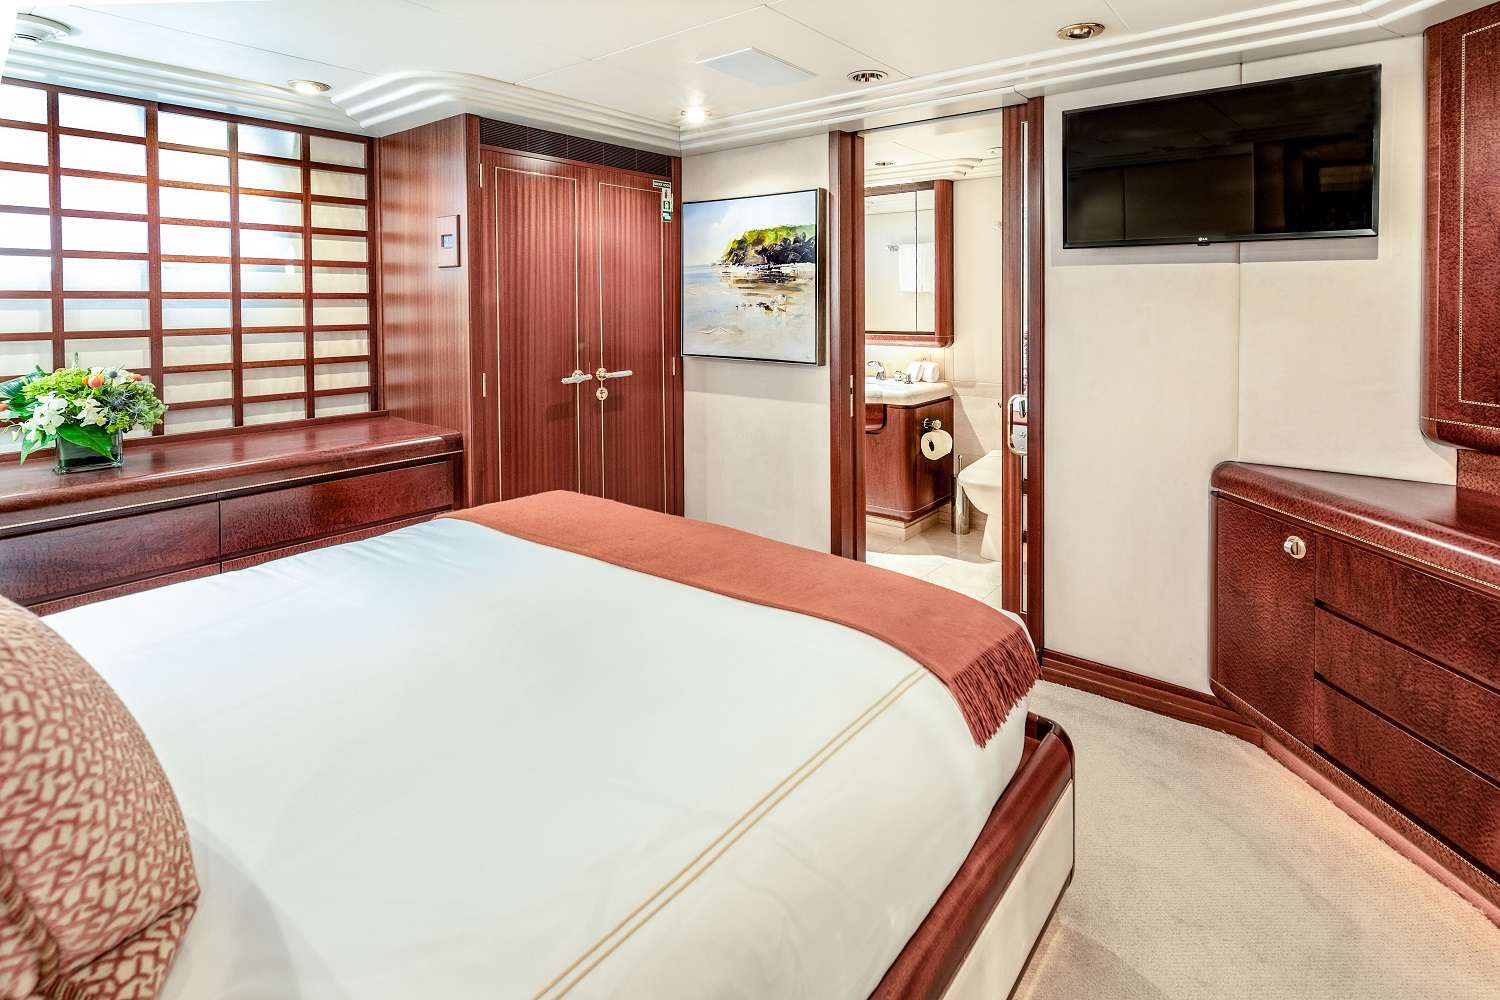 Motor Yacht 'NEVER ENOUGH' Guest stateroom, 10 PAX, 7 Crew, 140.00 Ft, 42.00 Meters, Built 1992, Feadship, Refit Year 2019